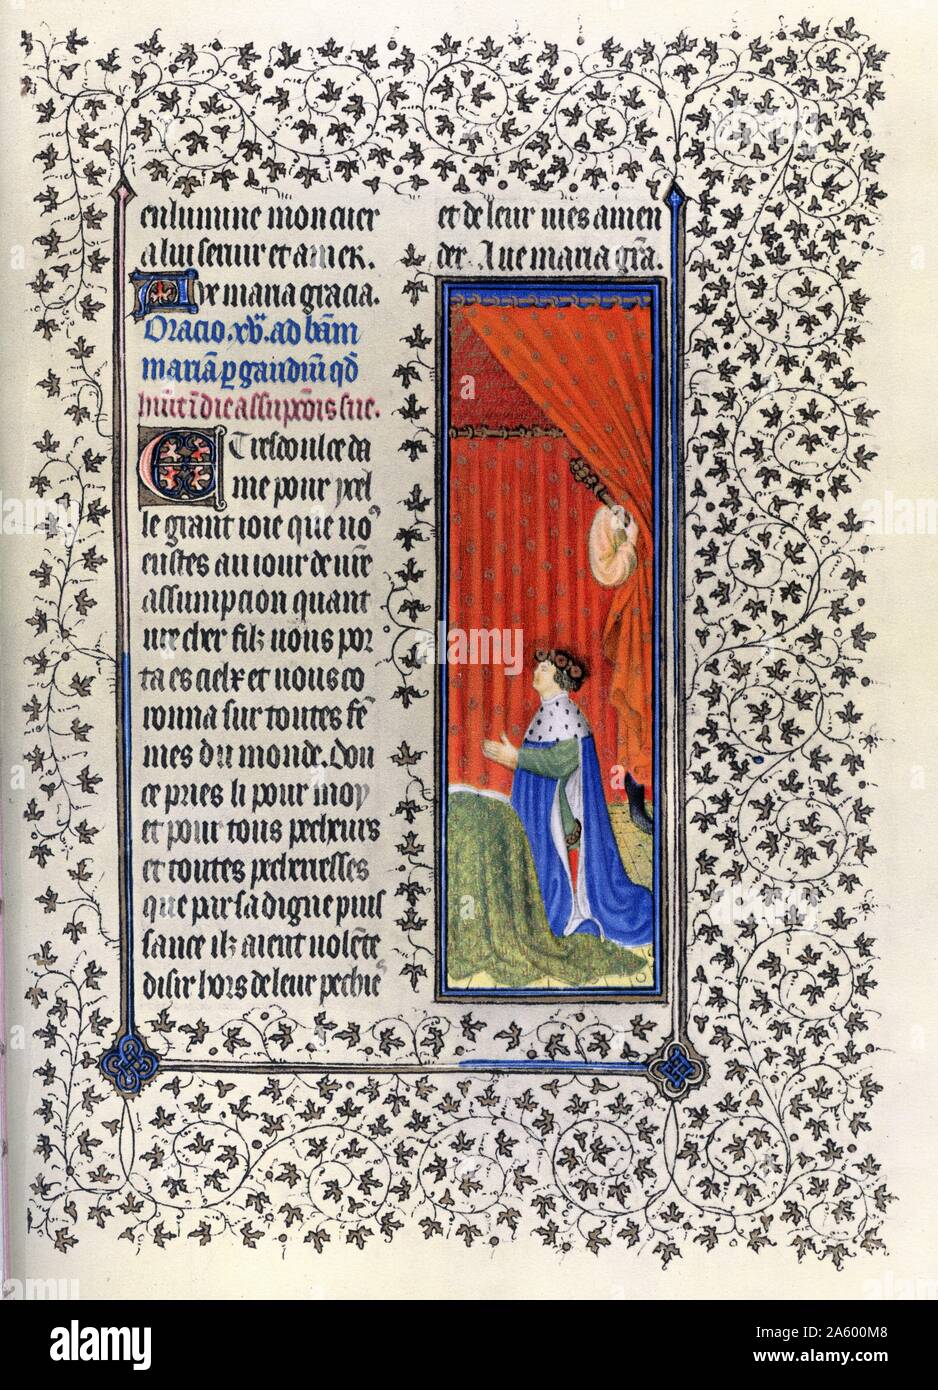 Illumination depicting Duc de Berry in Prayer from the Belles Heures of Jean de France, Duc de Berry (The Beautiful Hours) an early 15th-century illuminated manuscript book of hours. Dated 15th Century Stock Photo